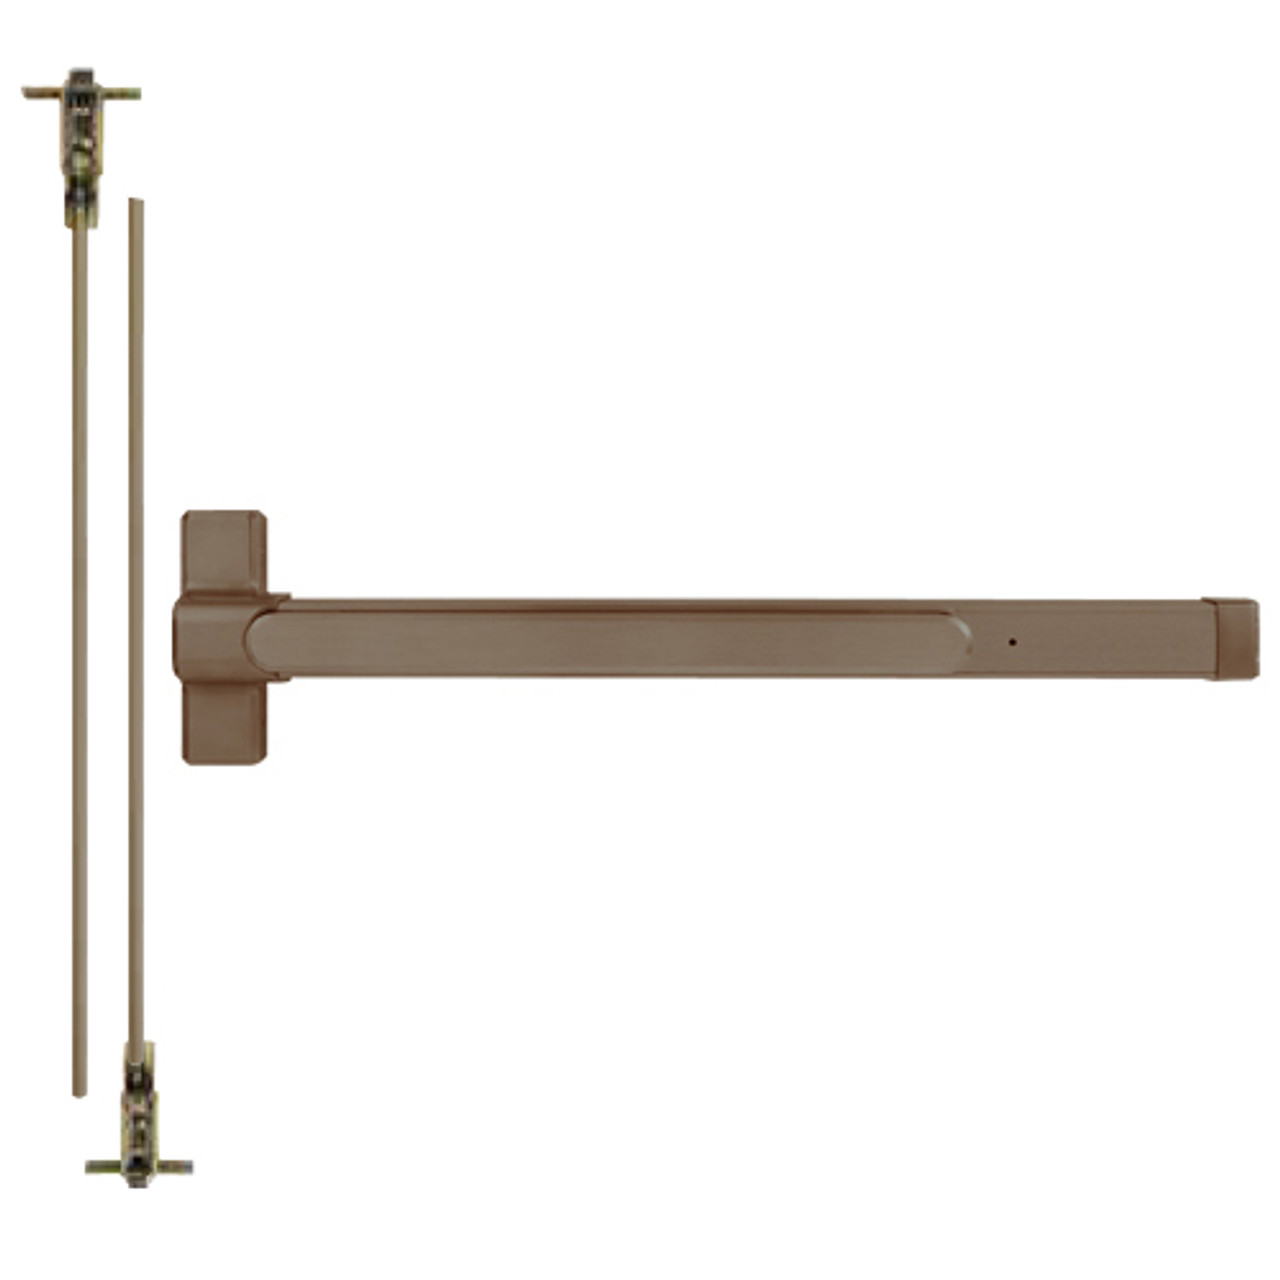 QED126X-48-8-313AN Stanley QED100 Series Heavy Duty Concealed Vertical Rod Fire Rated Exit Device in Anodized Duranodic Bronze Finish